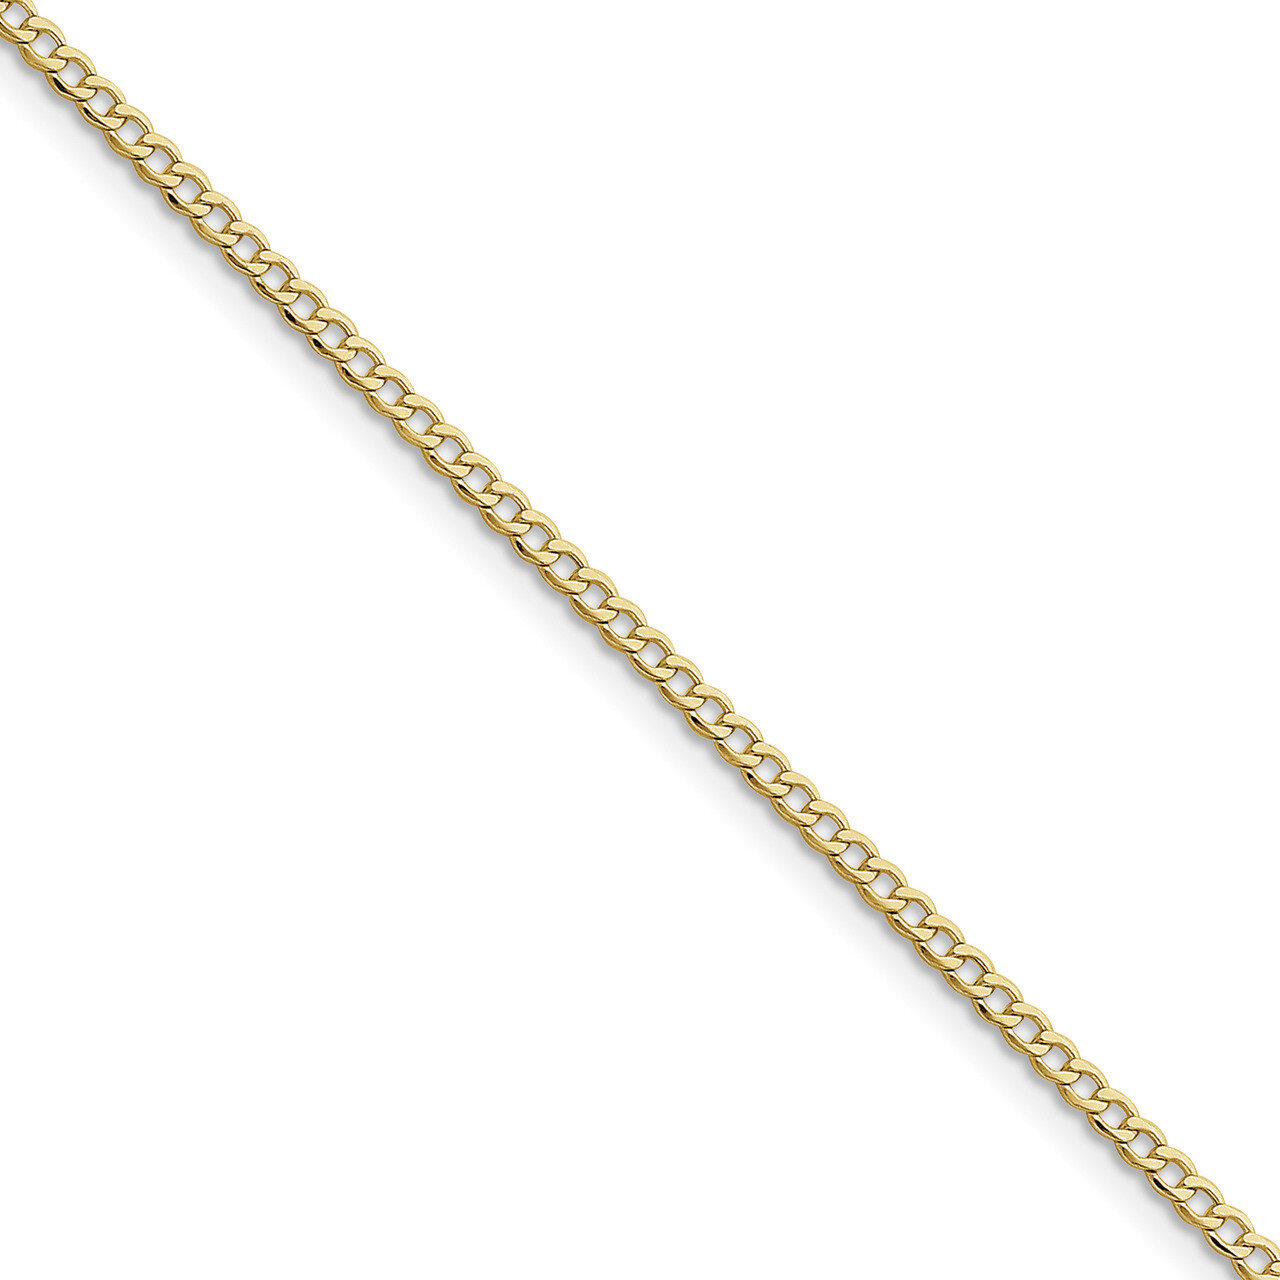 7 Inch 2.5mm Semi-Solid Curb Link Chain 10k Gold 10BC124-7